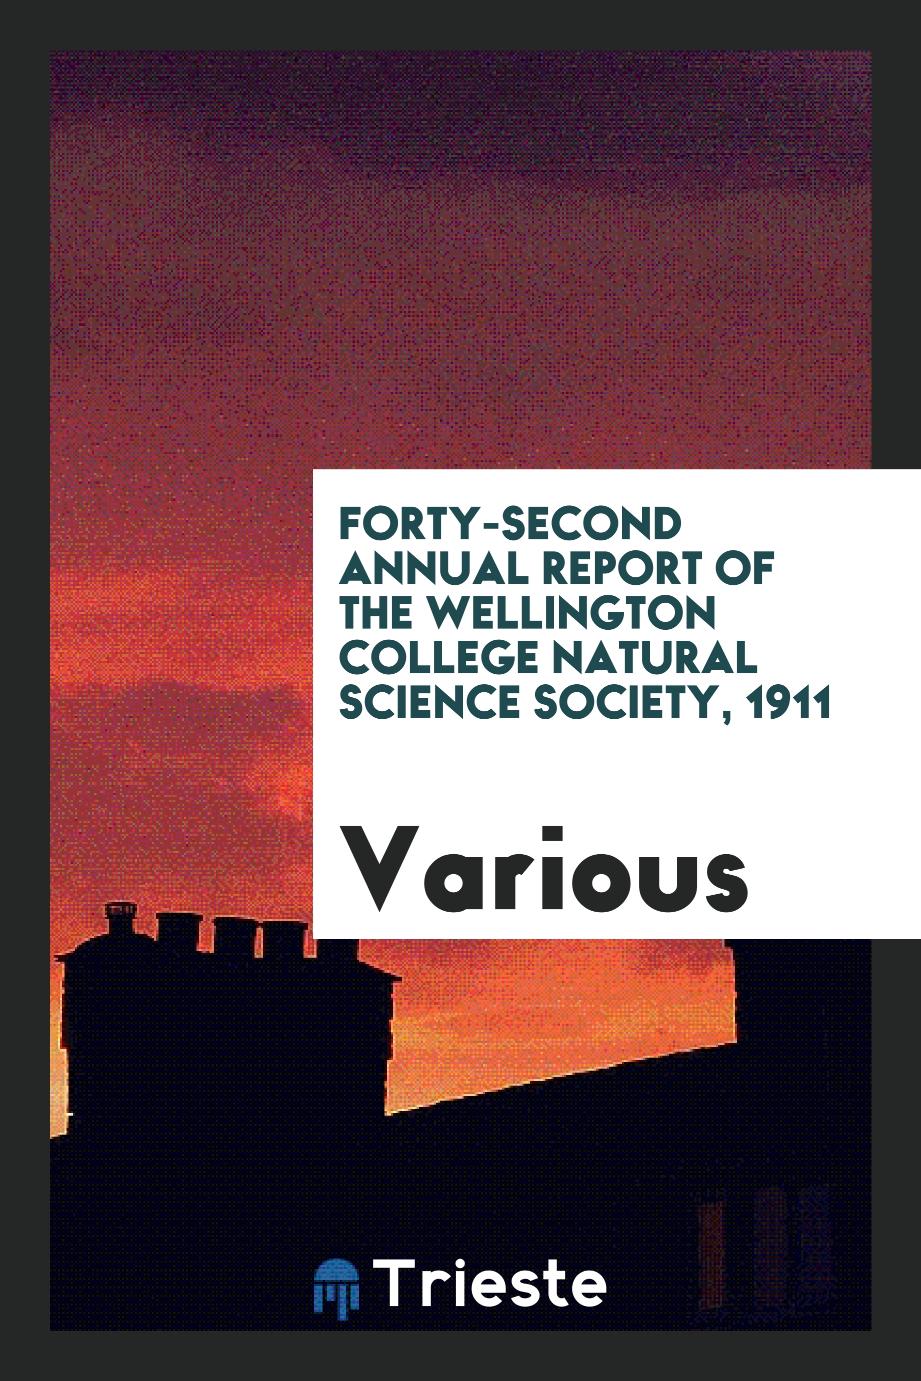 Forty-second annual report of the Wellington College natural science society, 1911